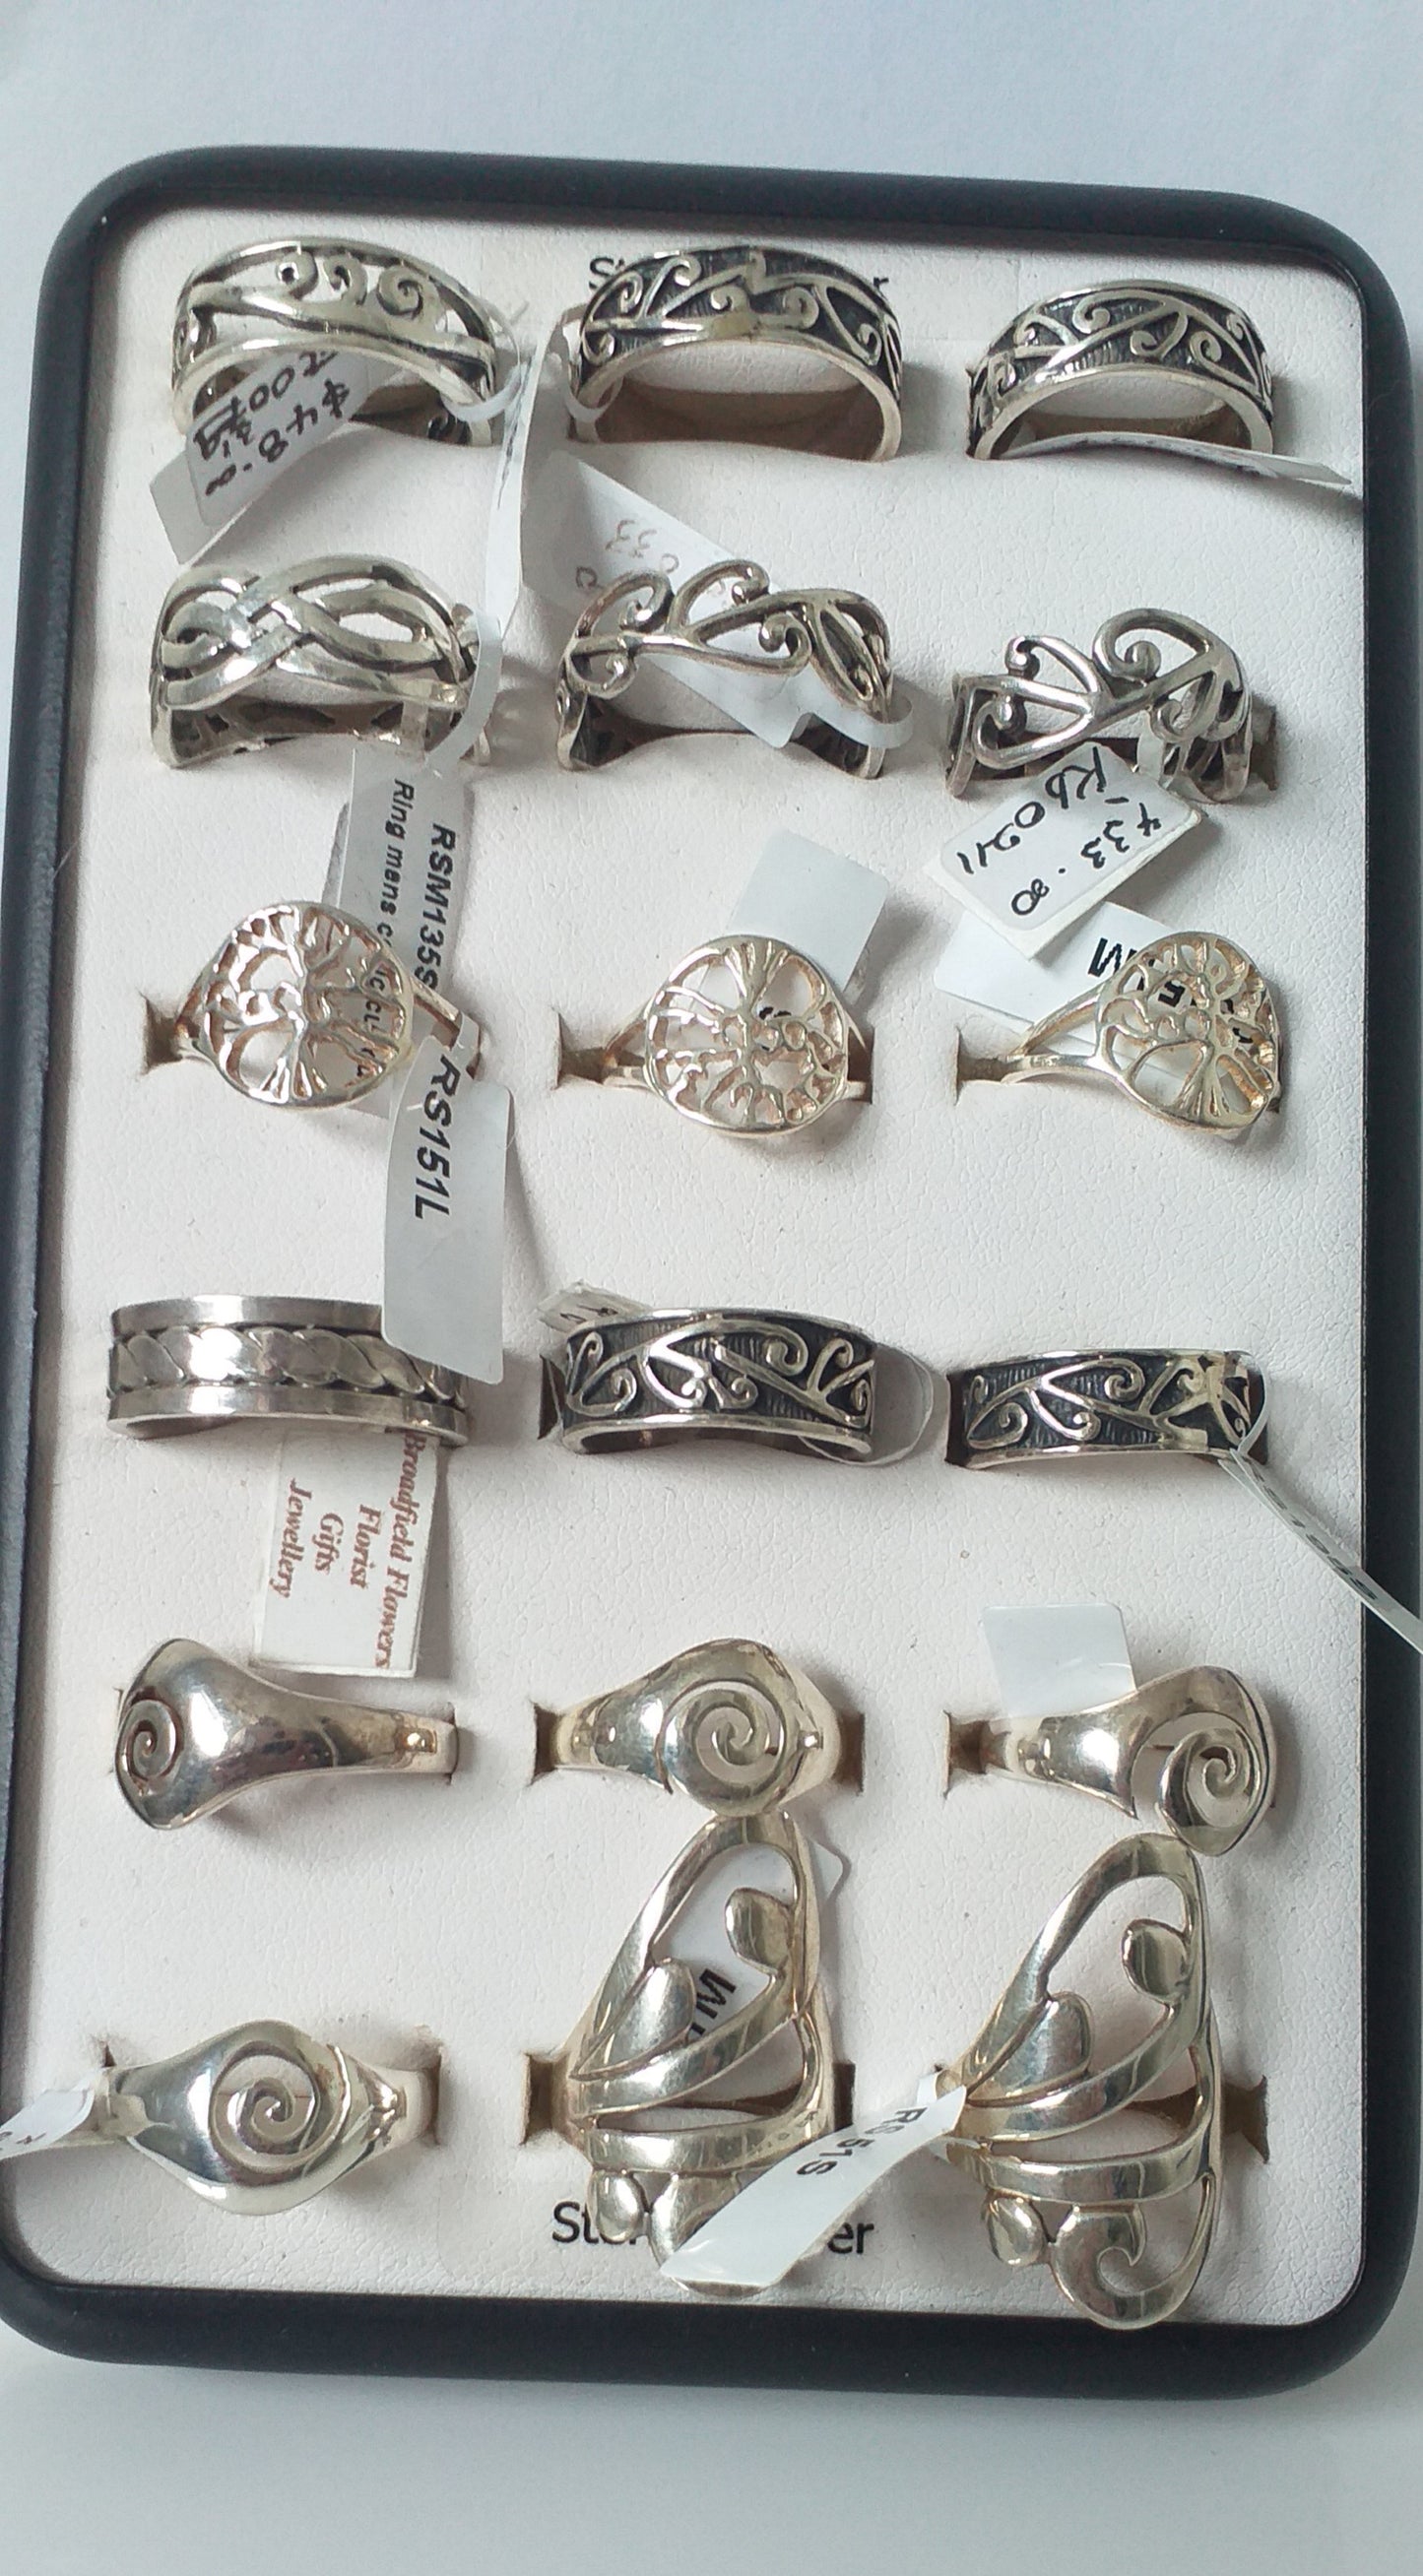 Rings, Selection of Sterling Silver Rings - Broadfield Flowers Florist Lincoln